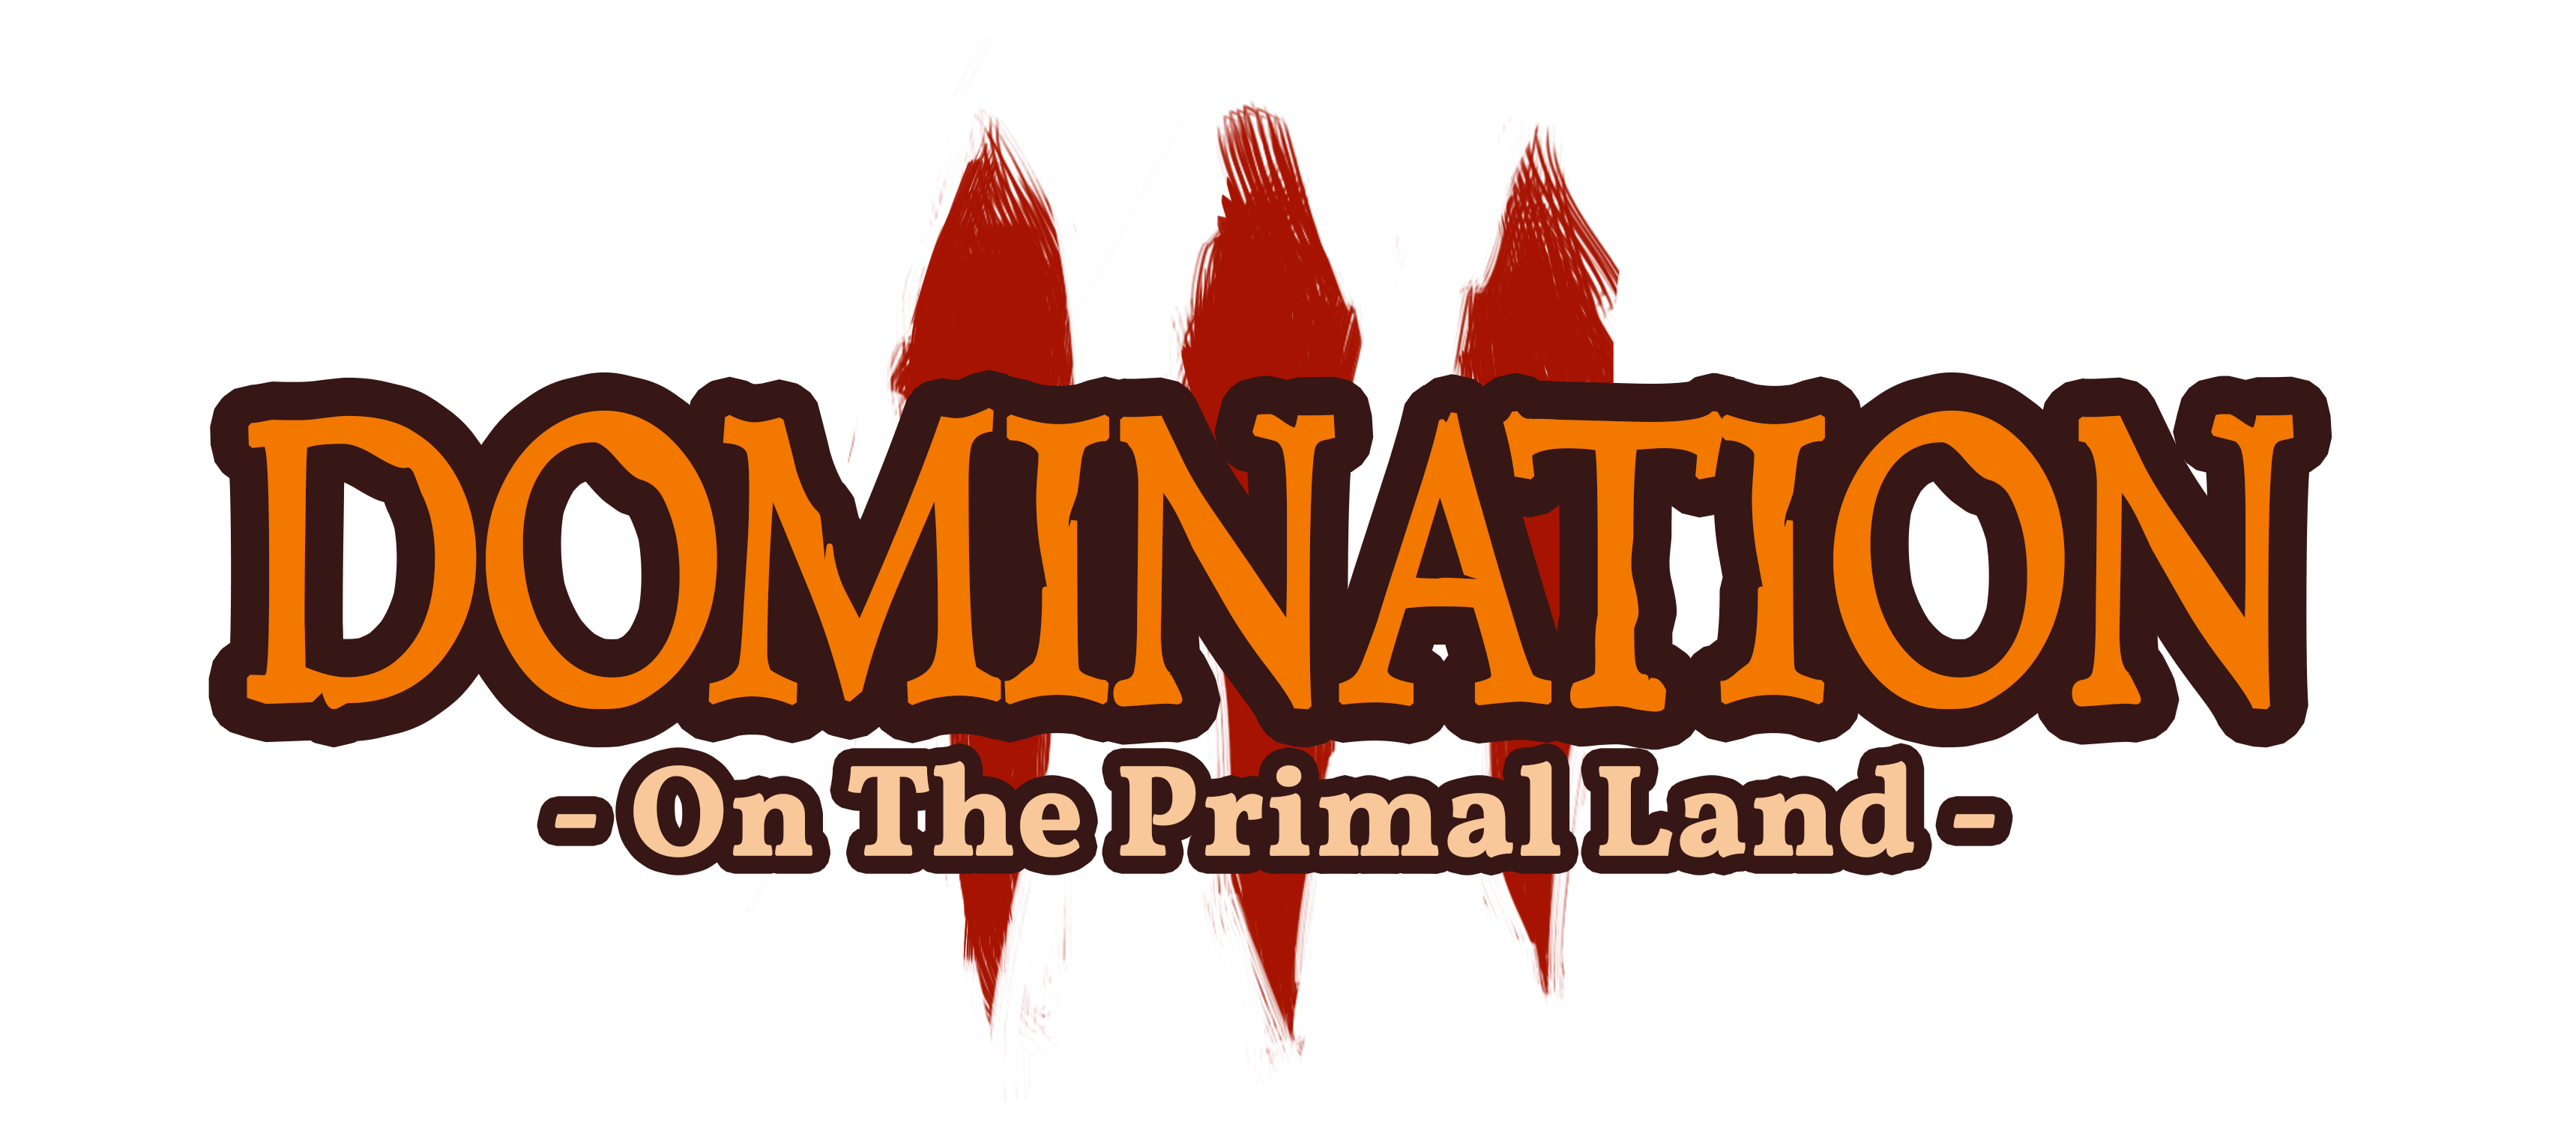 Domination on The Primal Land